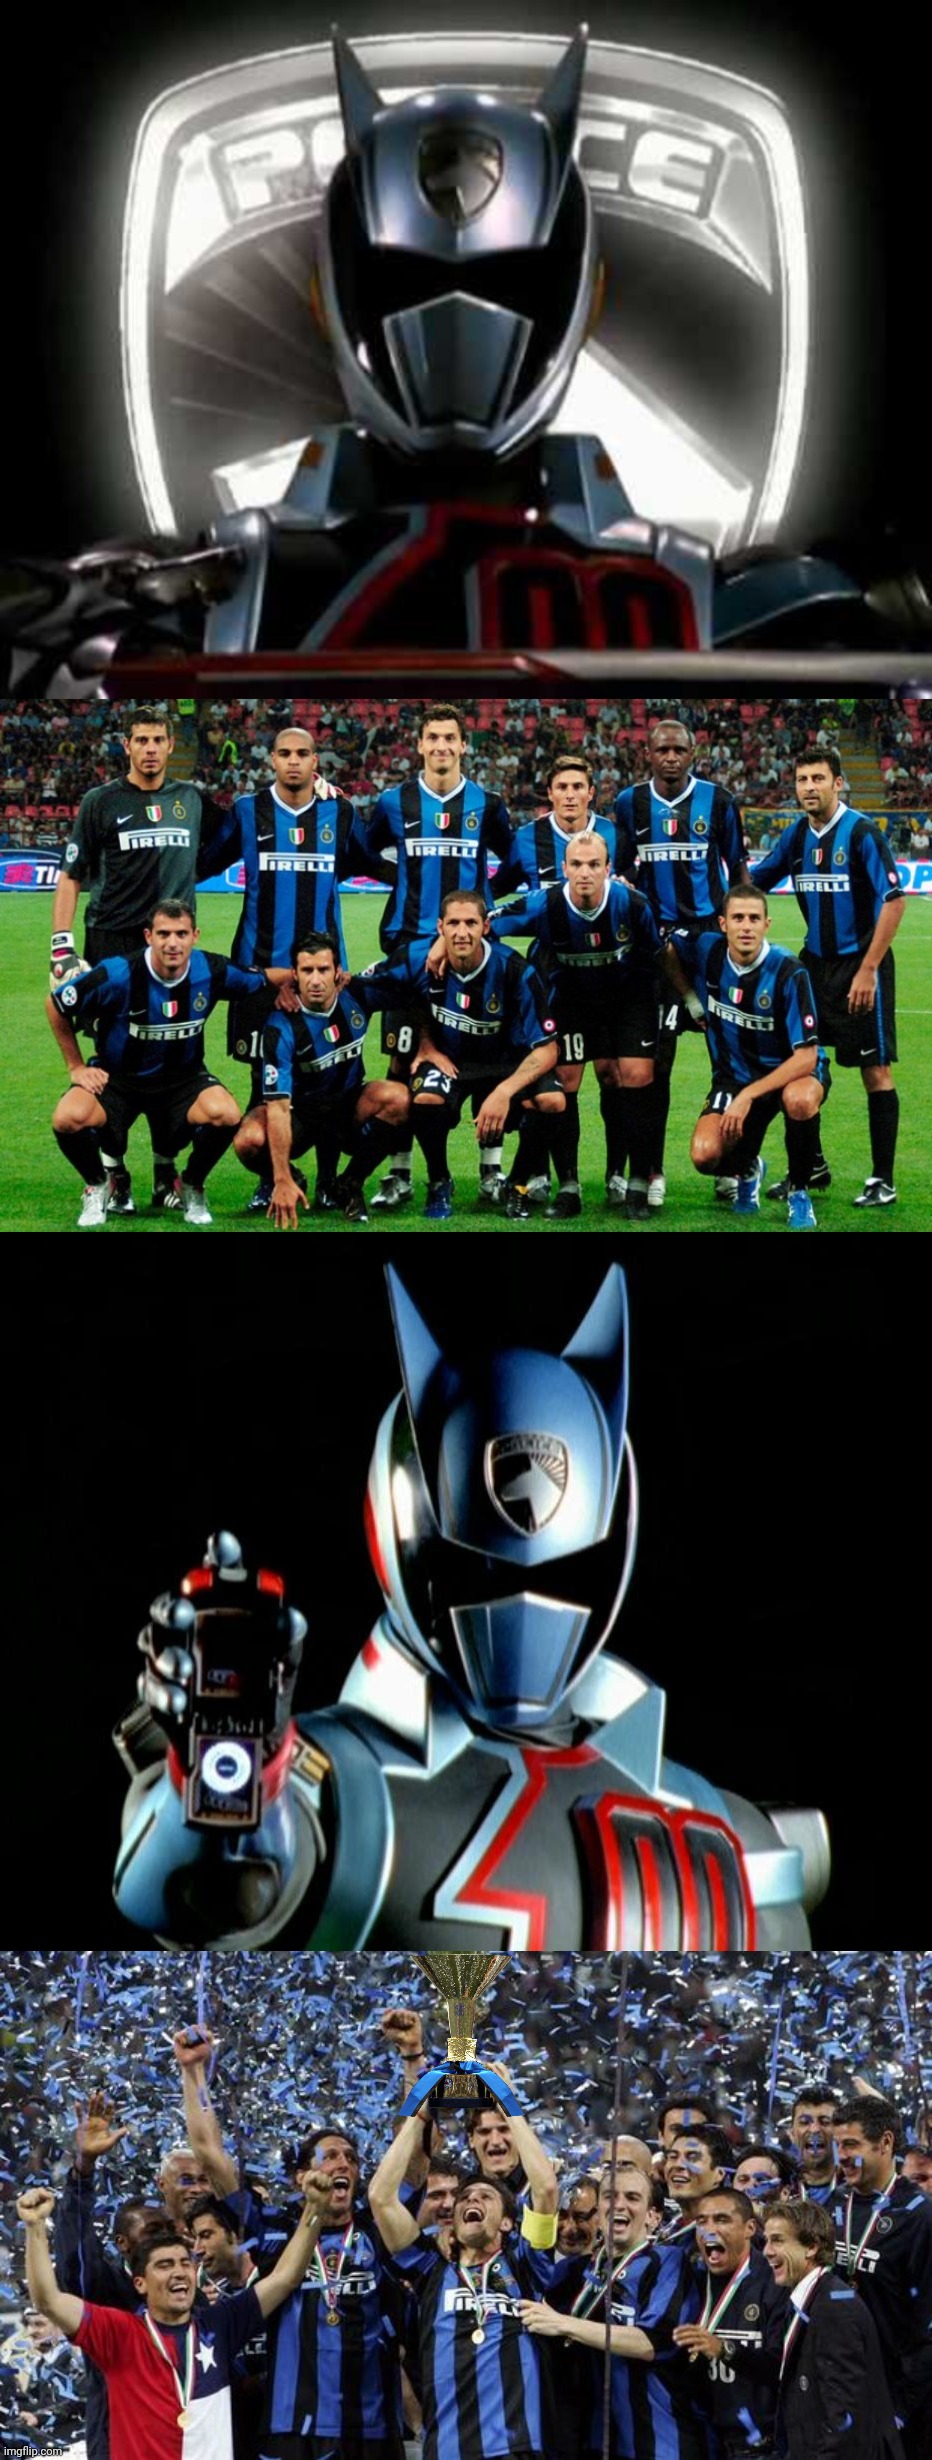 SPD Shadow Ranger sends a Scudetto to Inter Milan, 25 July 2006 footage | image tagged in memes,futbol,power rangers,inter milan,italy | made w/ Imgflip meme maker